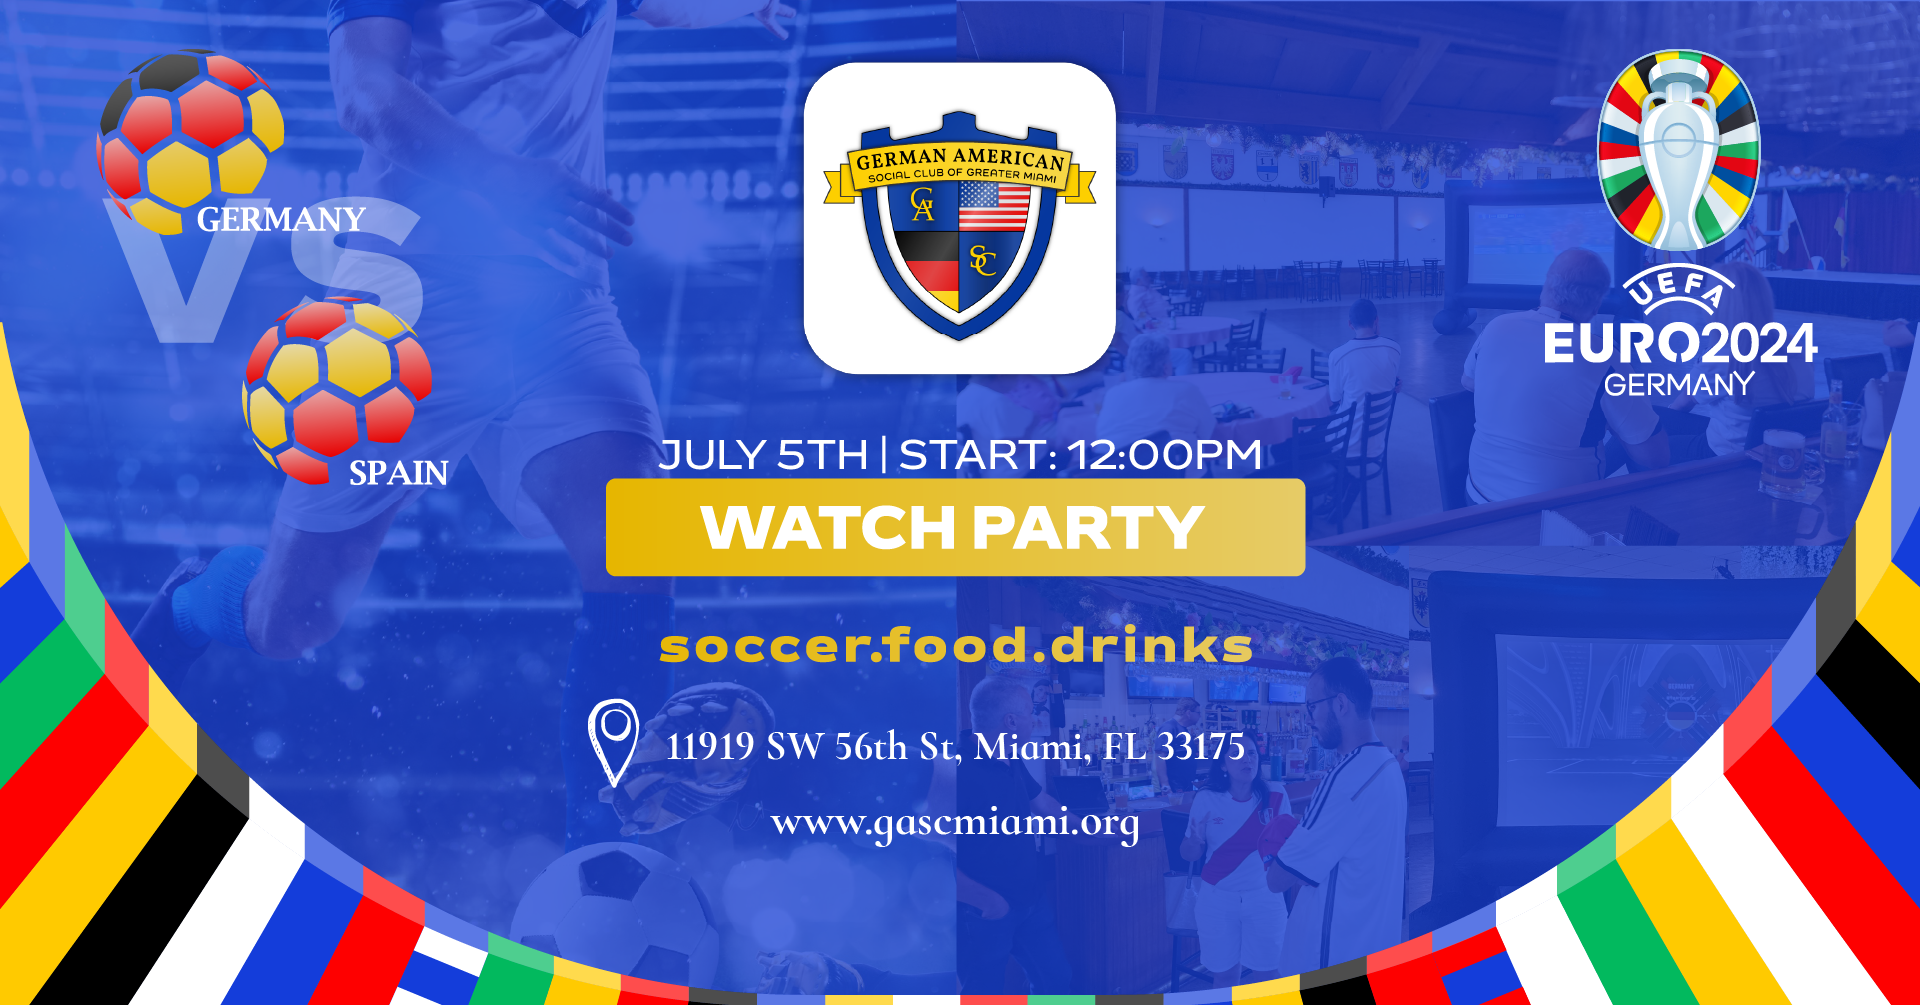 EURO 2024 - Watch Party Germany vs. Spain in Miami